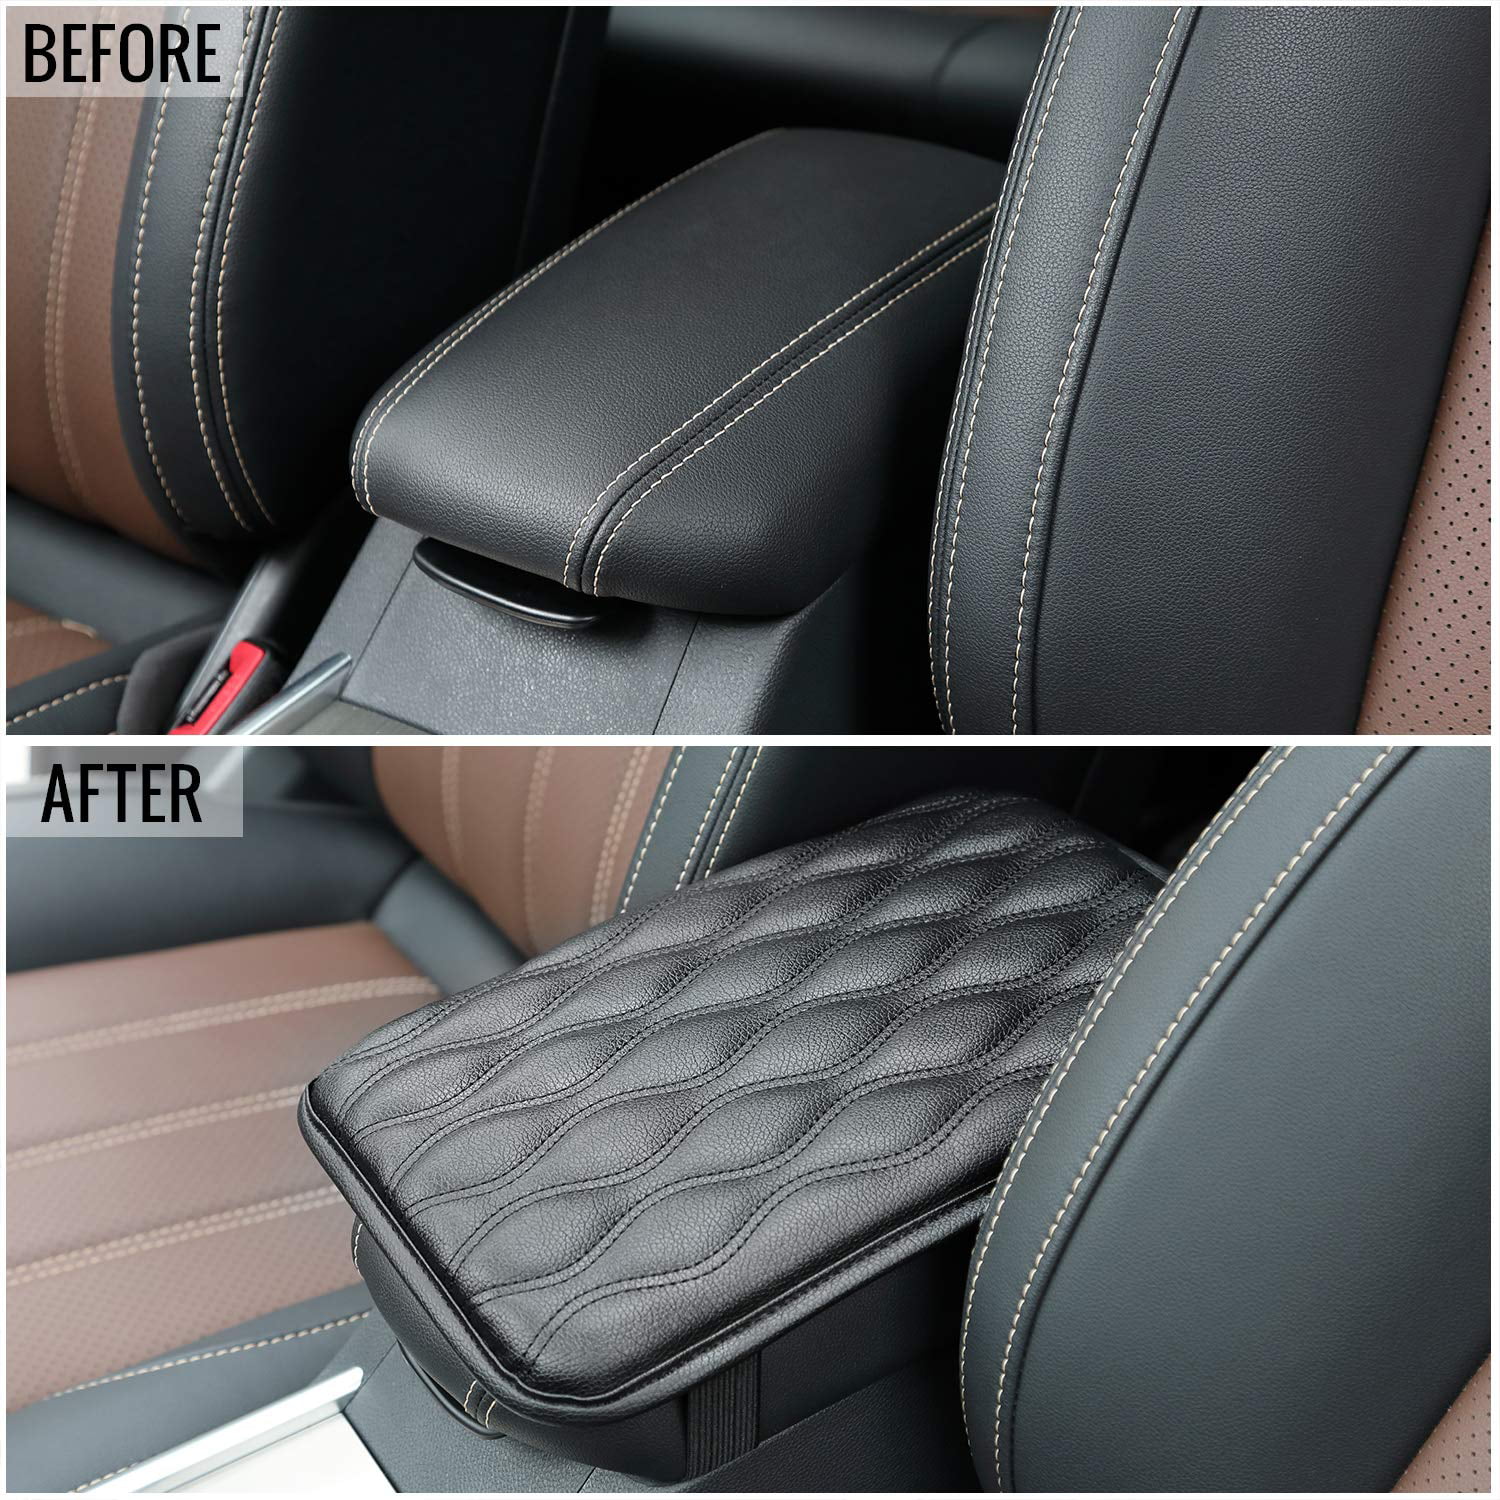 Brown SUV Car Truck Waterproof PU Leather Car Armrest Seat Box Cover Protector for Most Vehicle BLAU GRUN Auto Center Console Cover Pad 